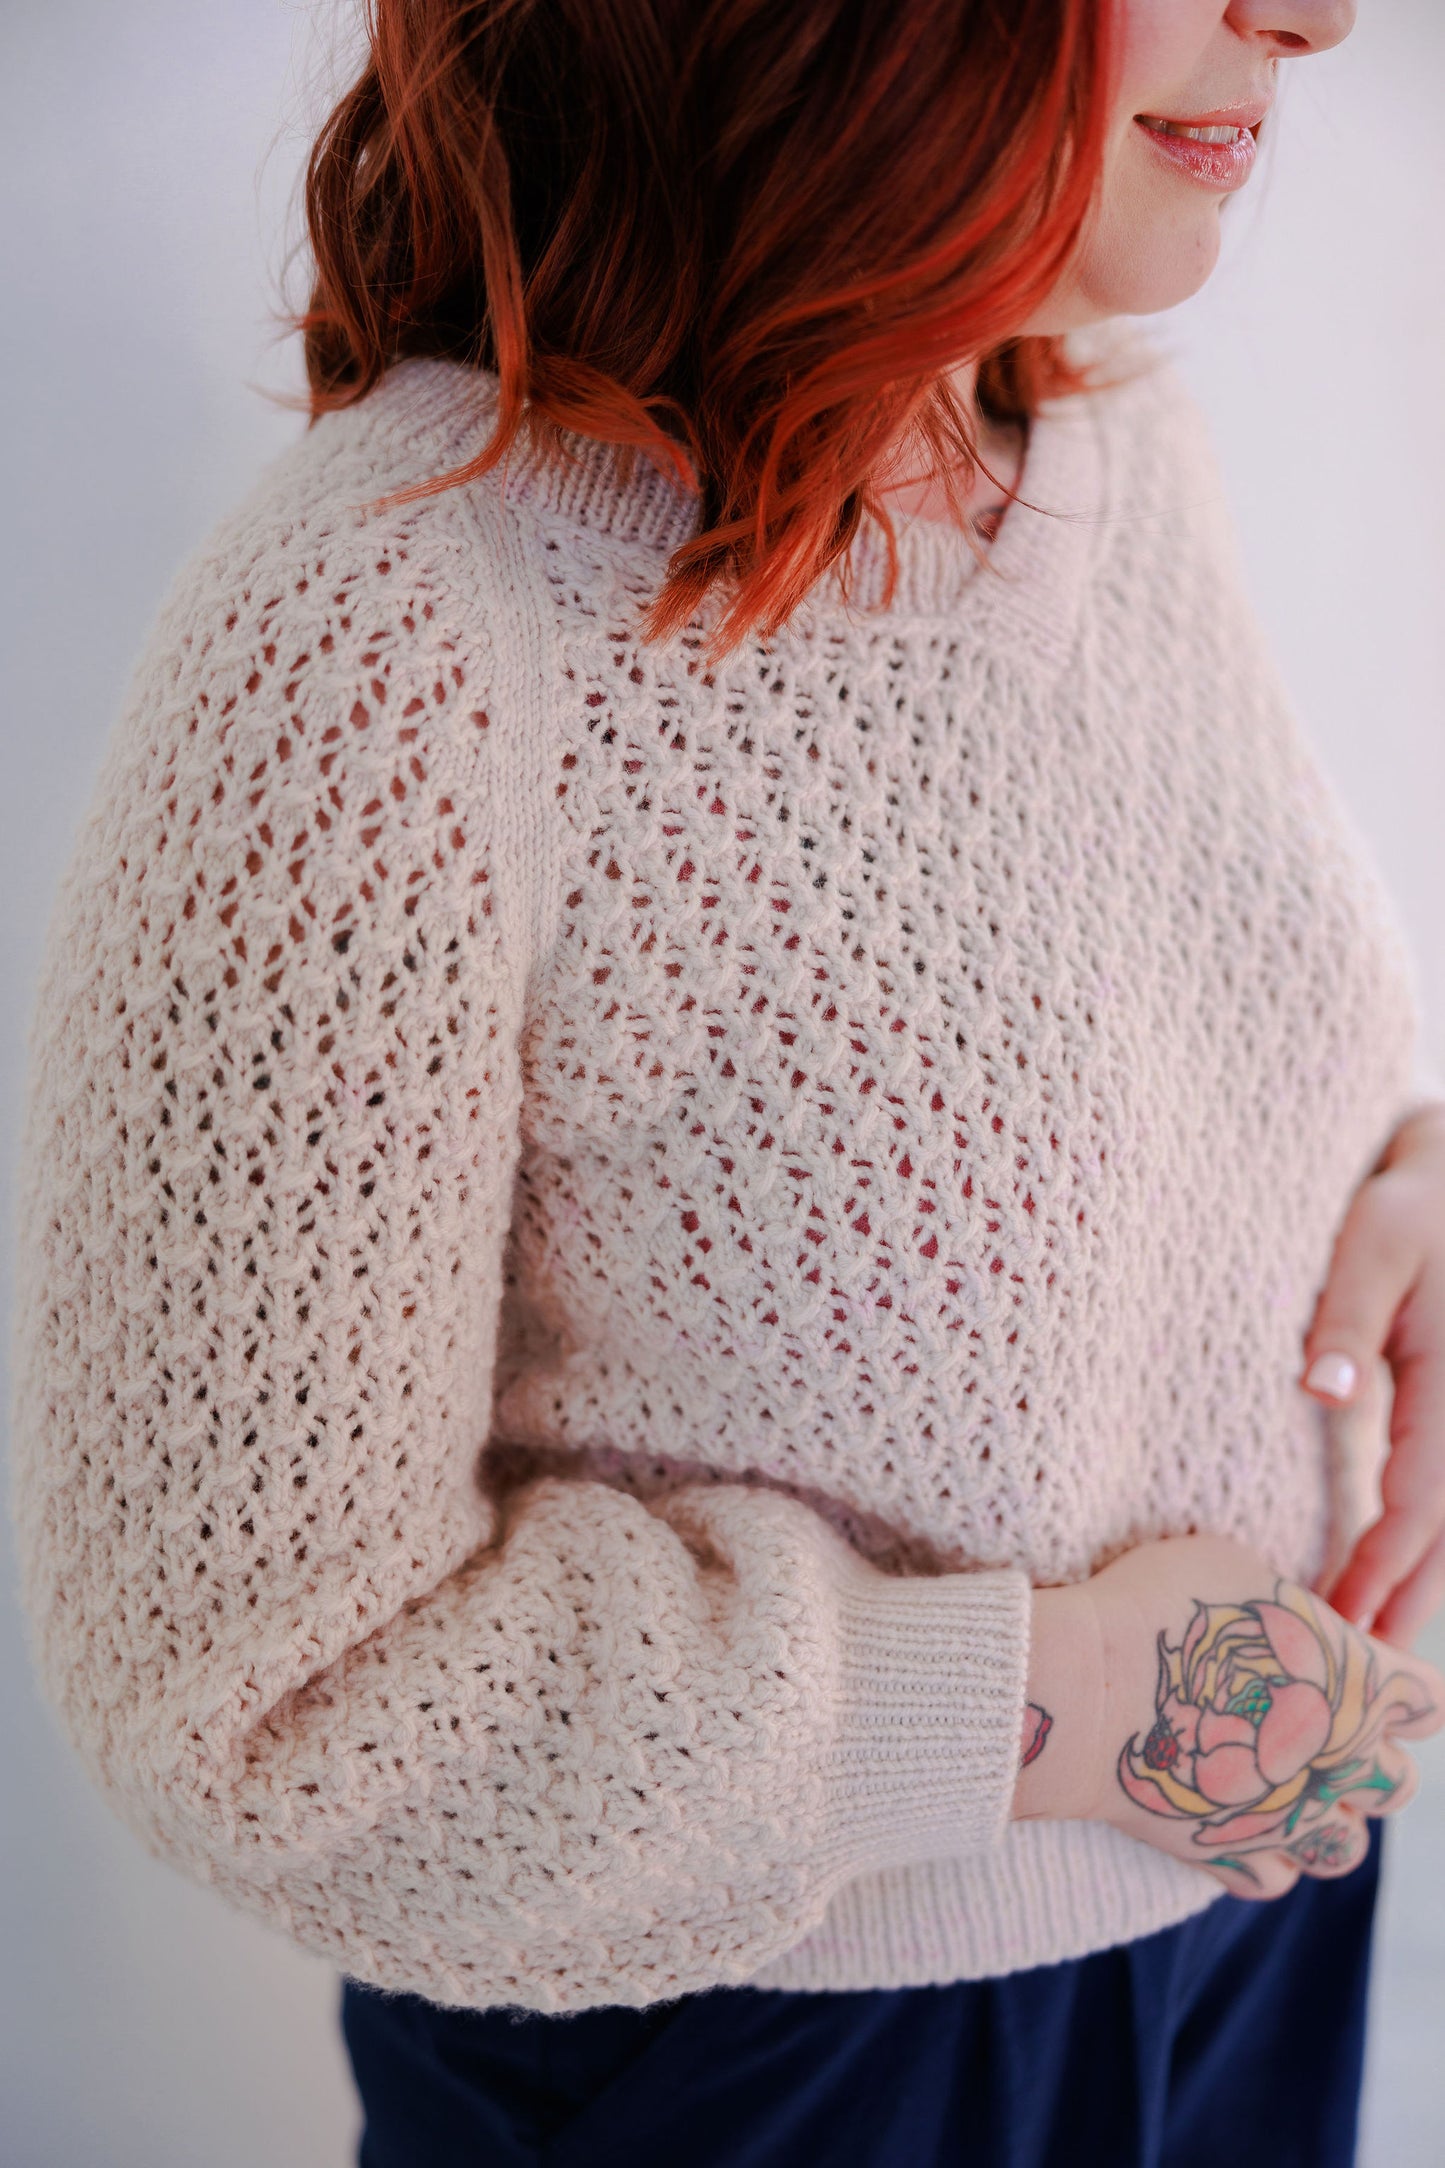 Bess wears a cream lace knit sweater, the Mary Raglan. She is seen at a 3/4 angle, and is smiling.